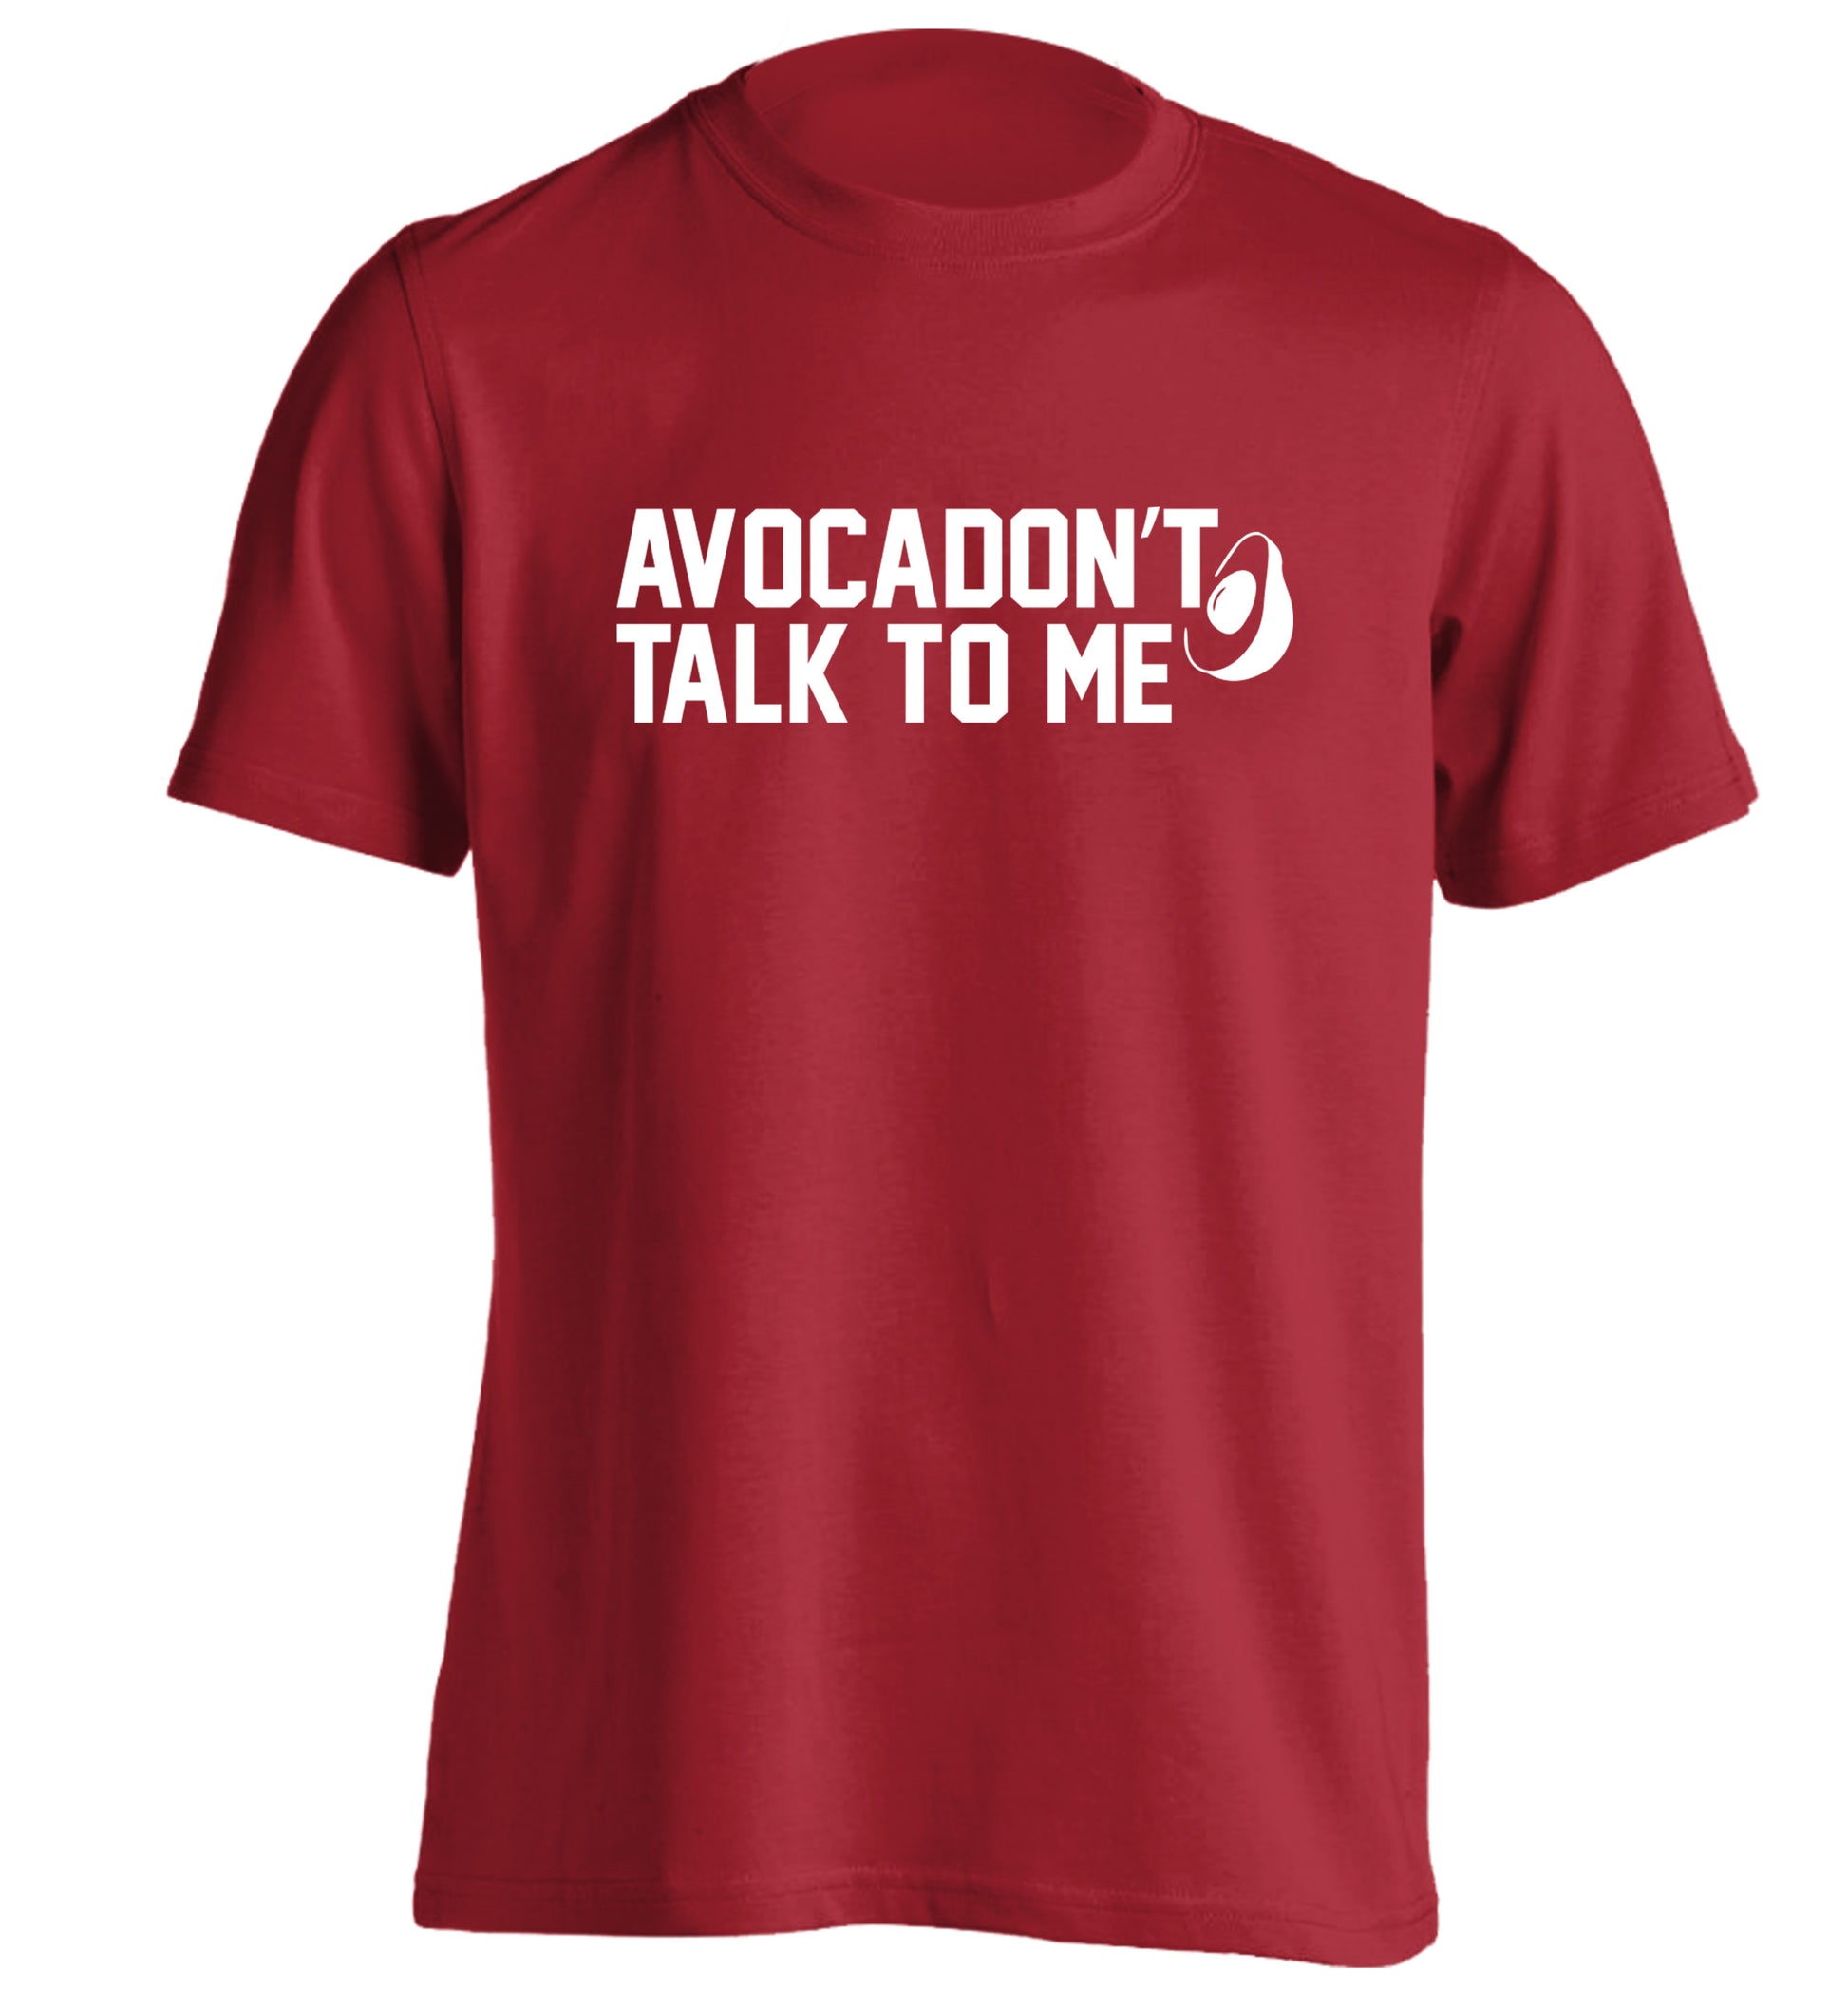 Avocadon't talk to me adults unisex red Tshirt 2XL